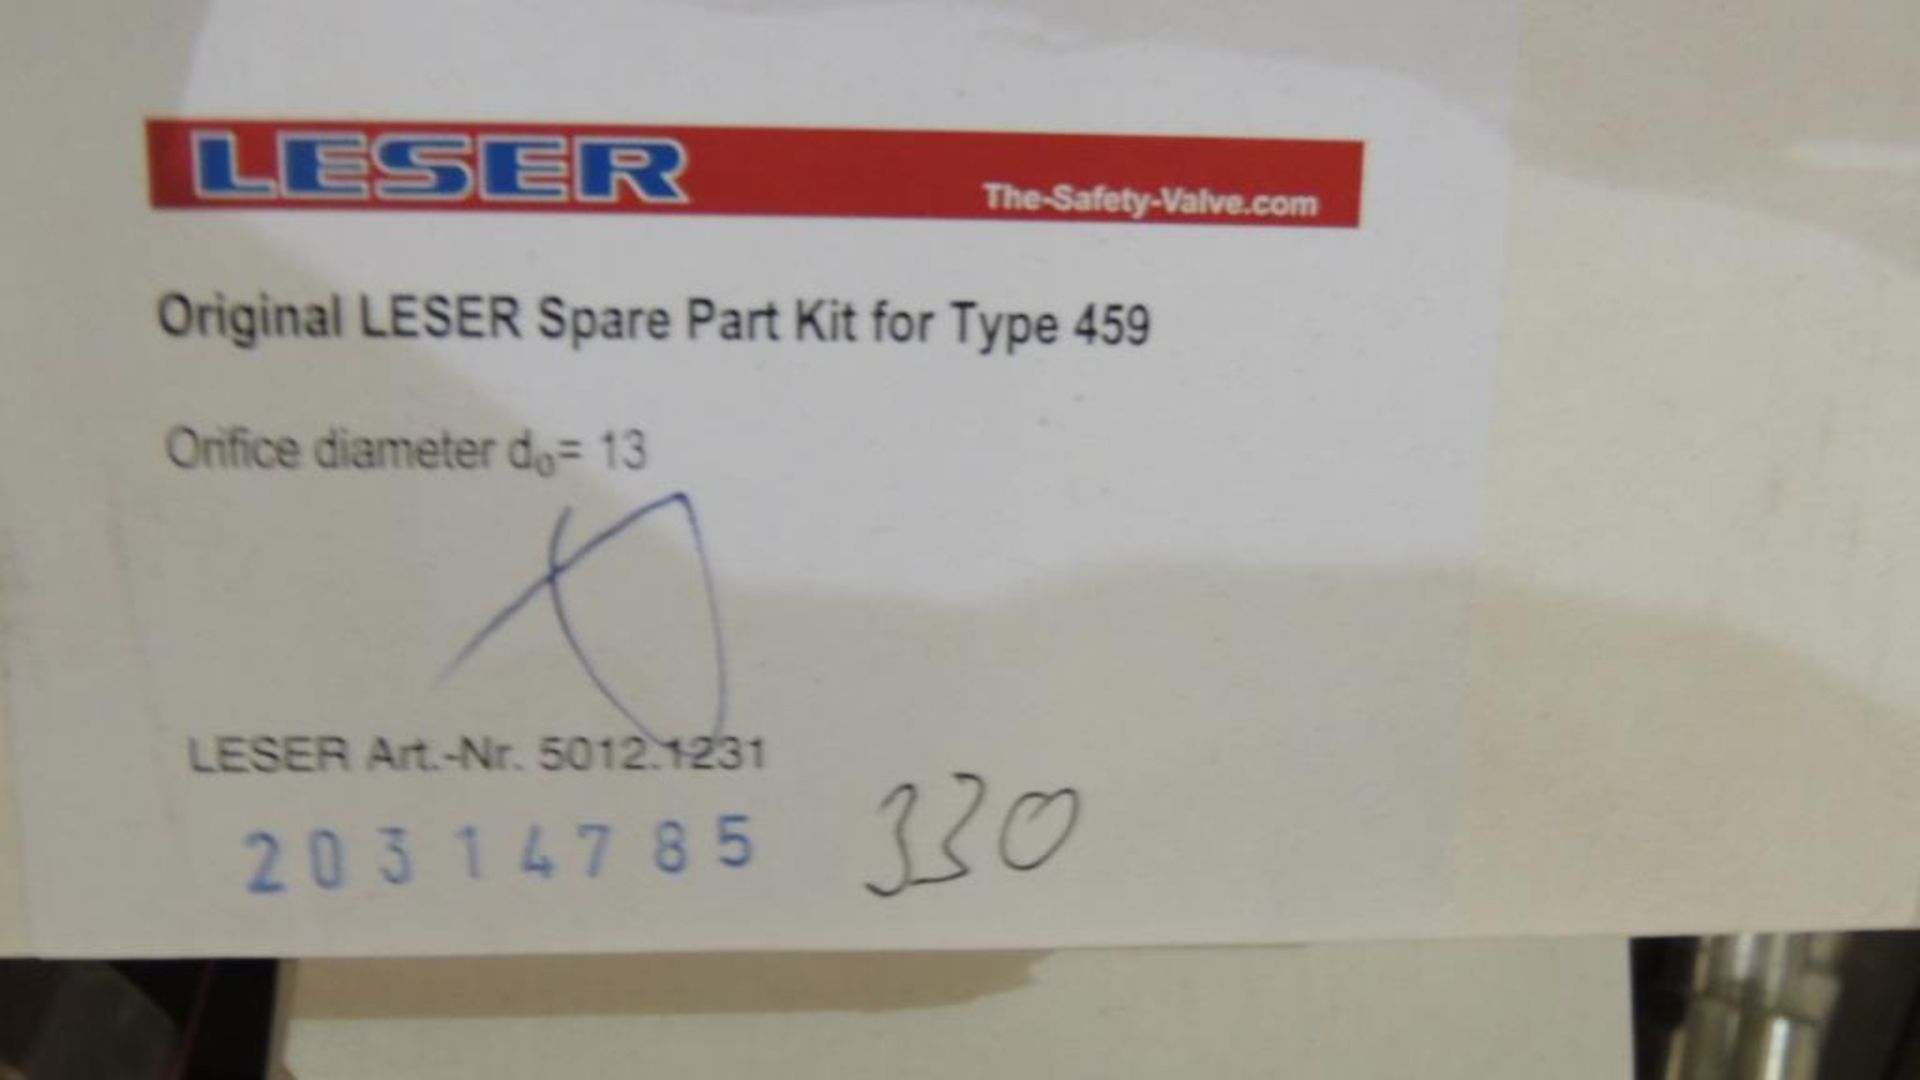 Large Quantity of Leser Relief and Safety Valves, plus Spare Parts Kits - Image 93 of 374